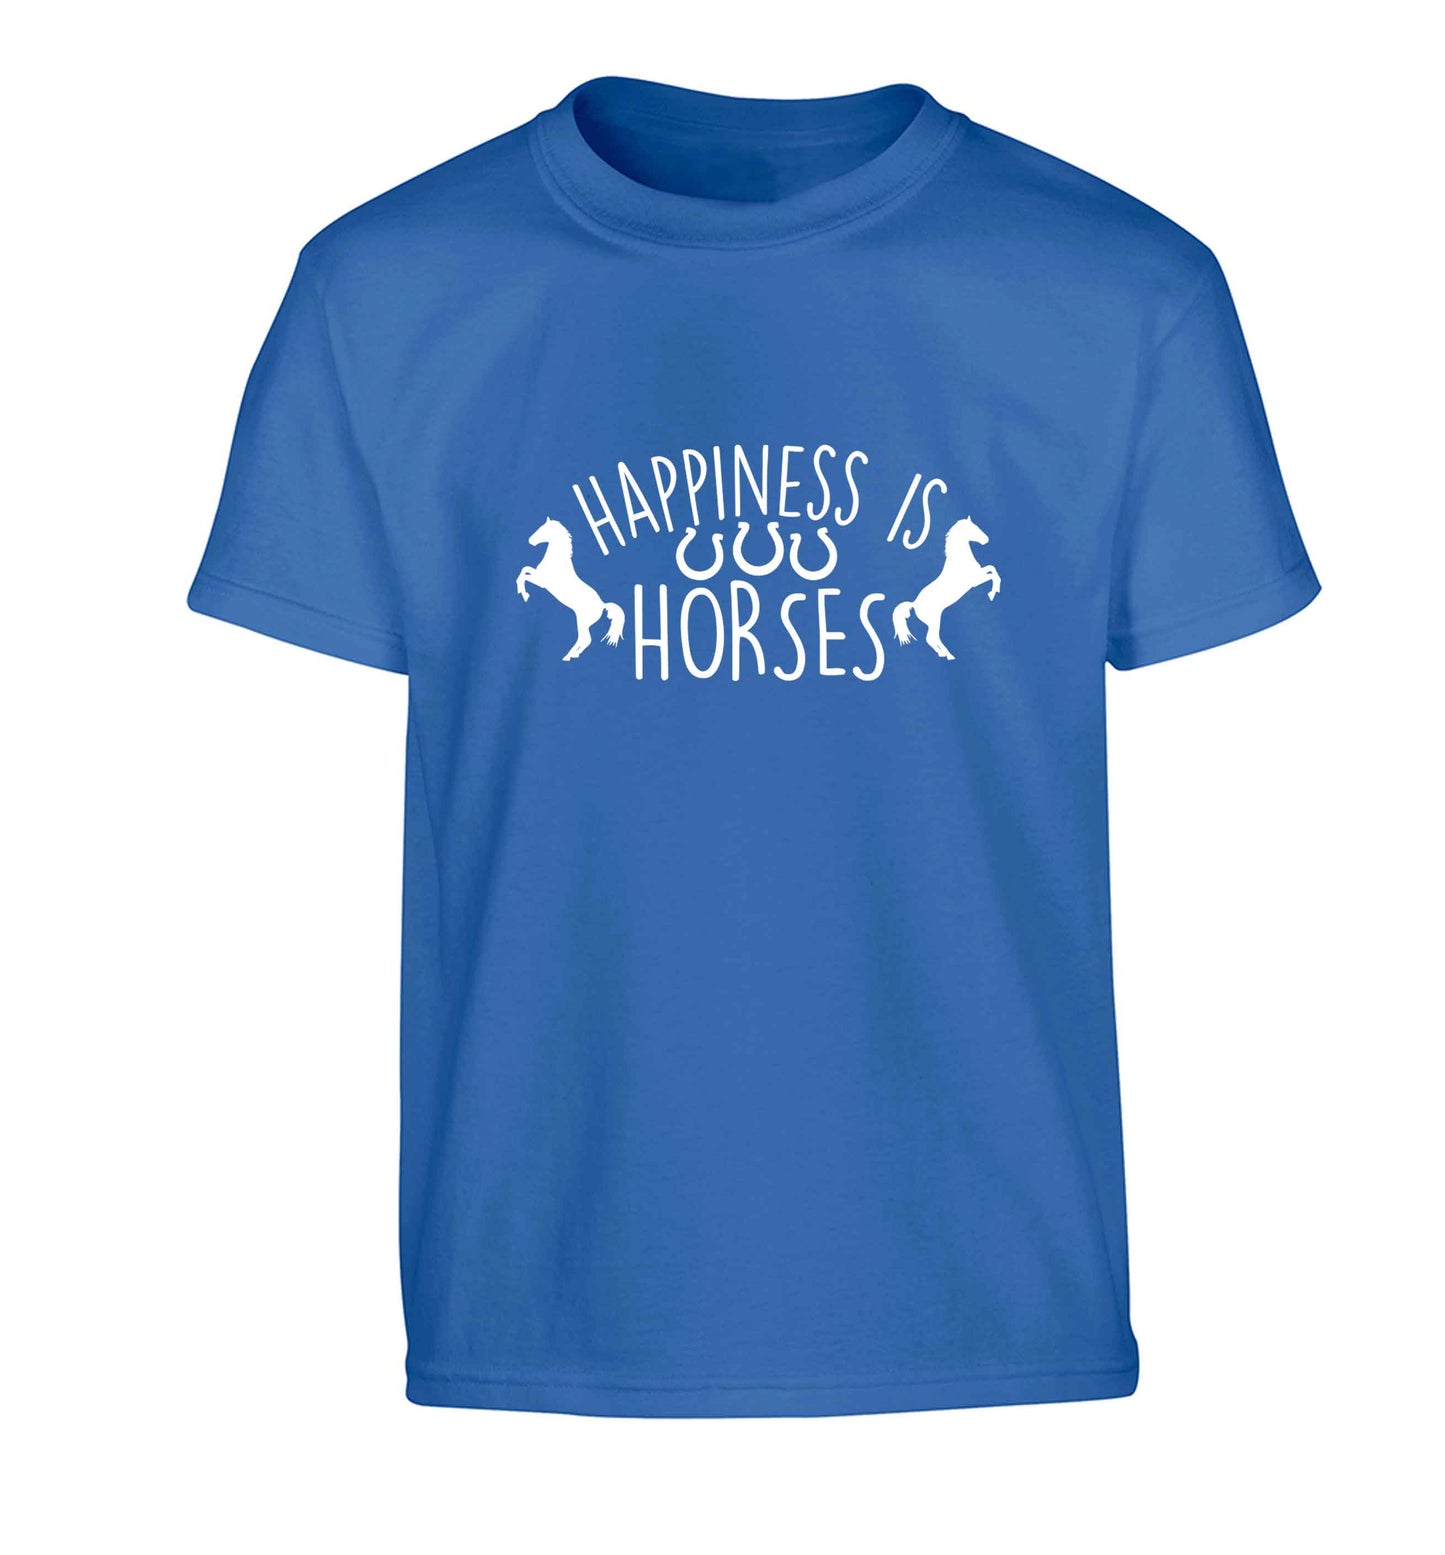 Happiness is horses Children's blue Tshirt 12-13 Years